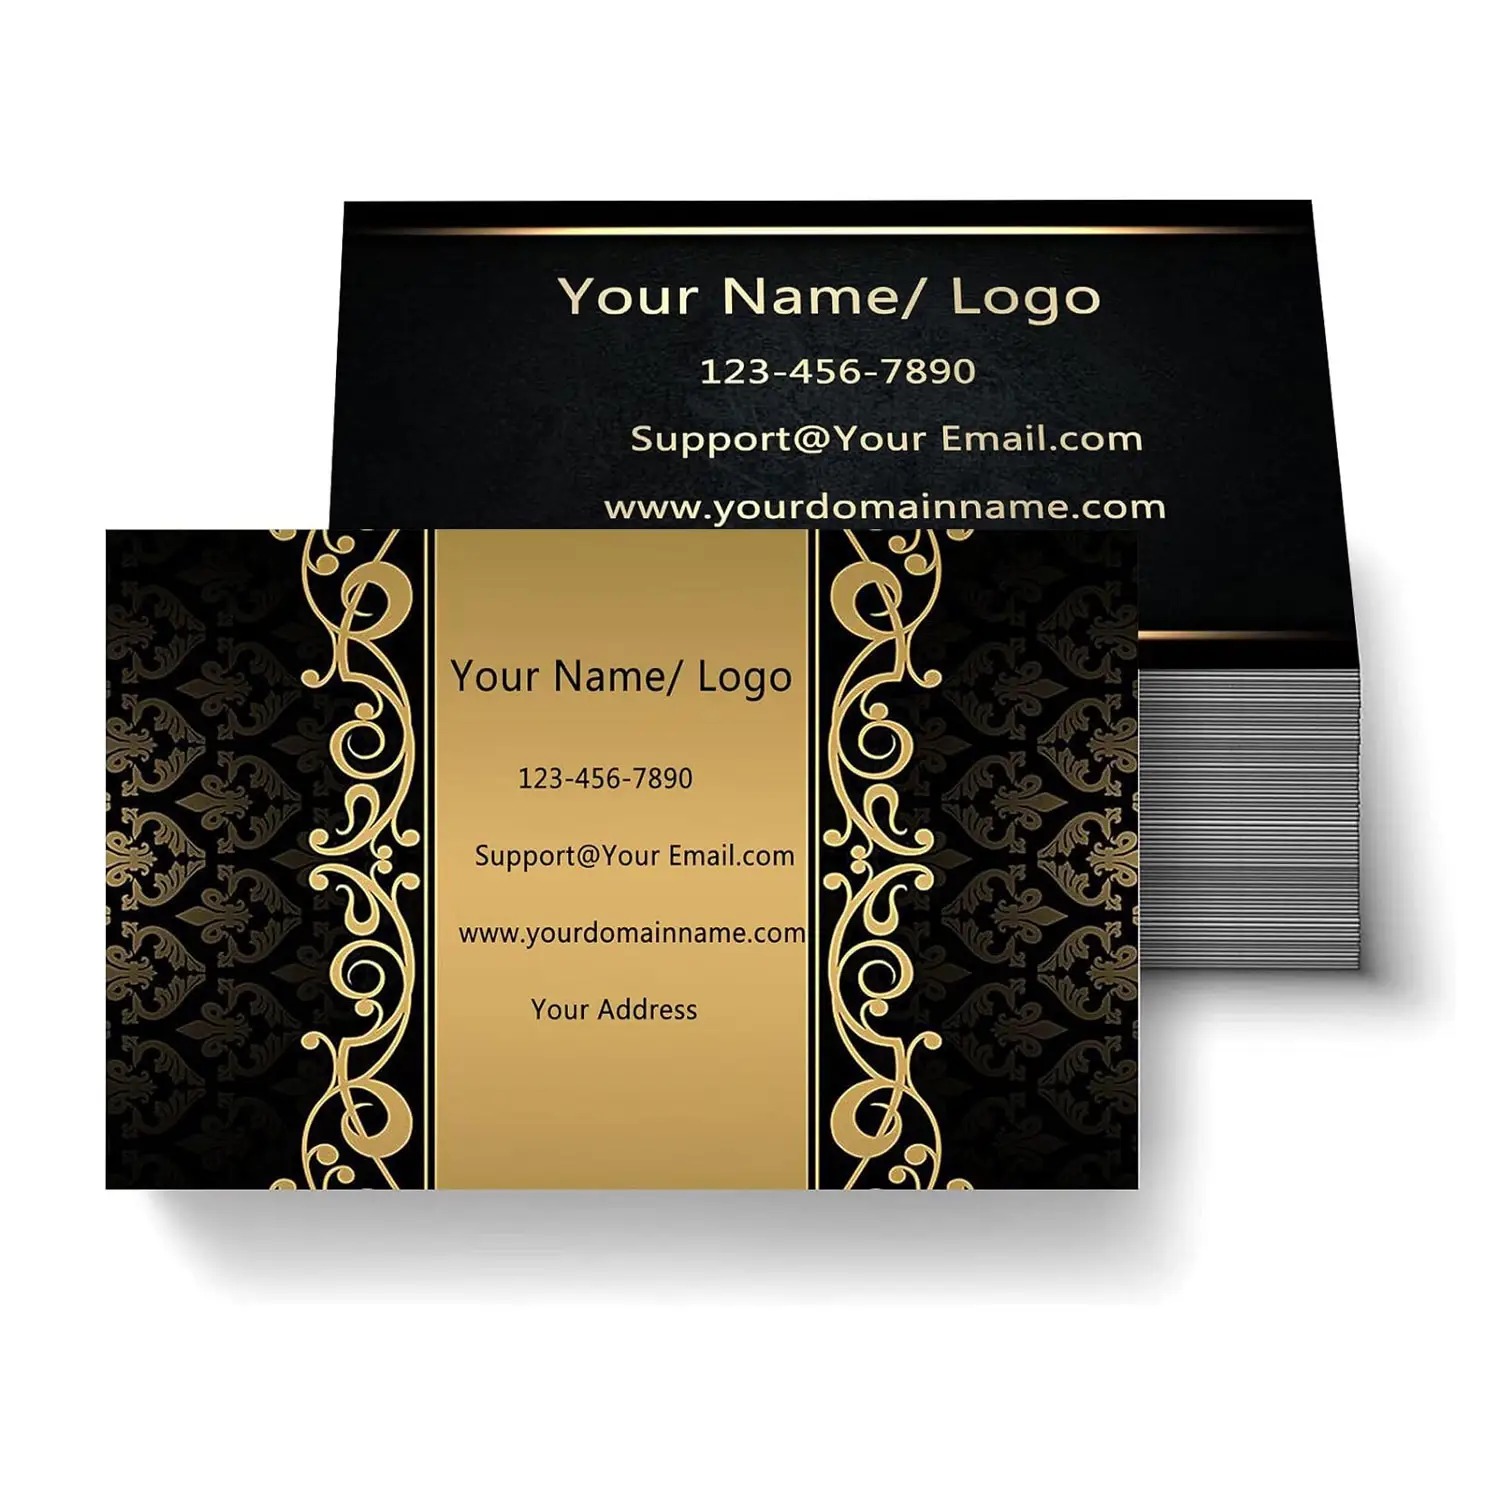 Create Connections Personalized Business Cards With Logo And Text Waterproof Paper Come With Matte Coating Process Cards